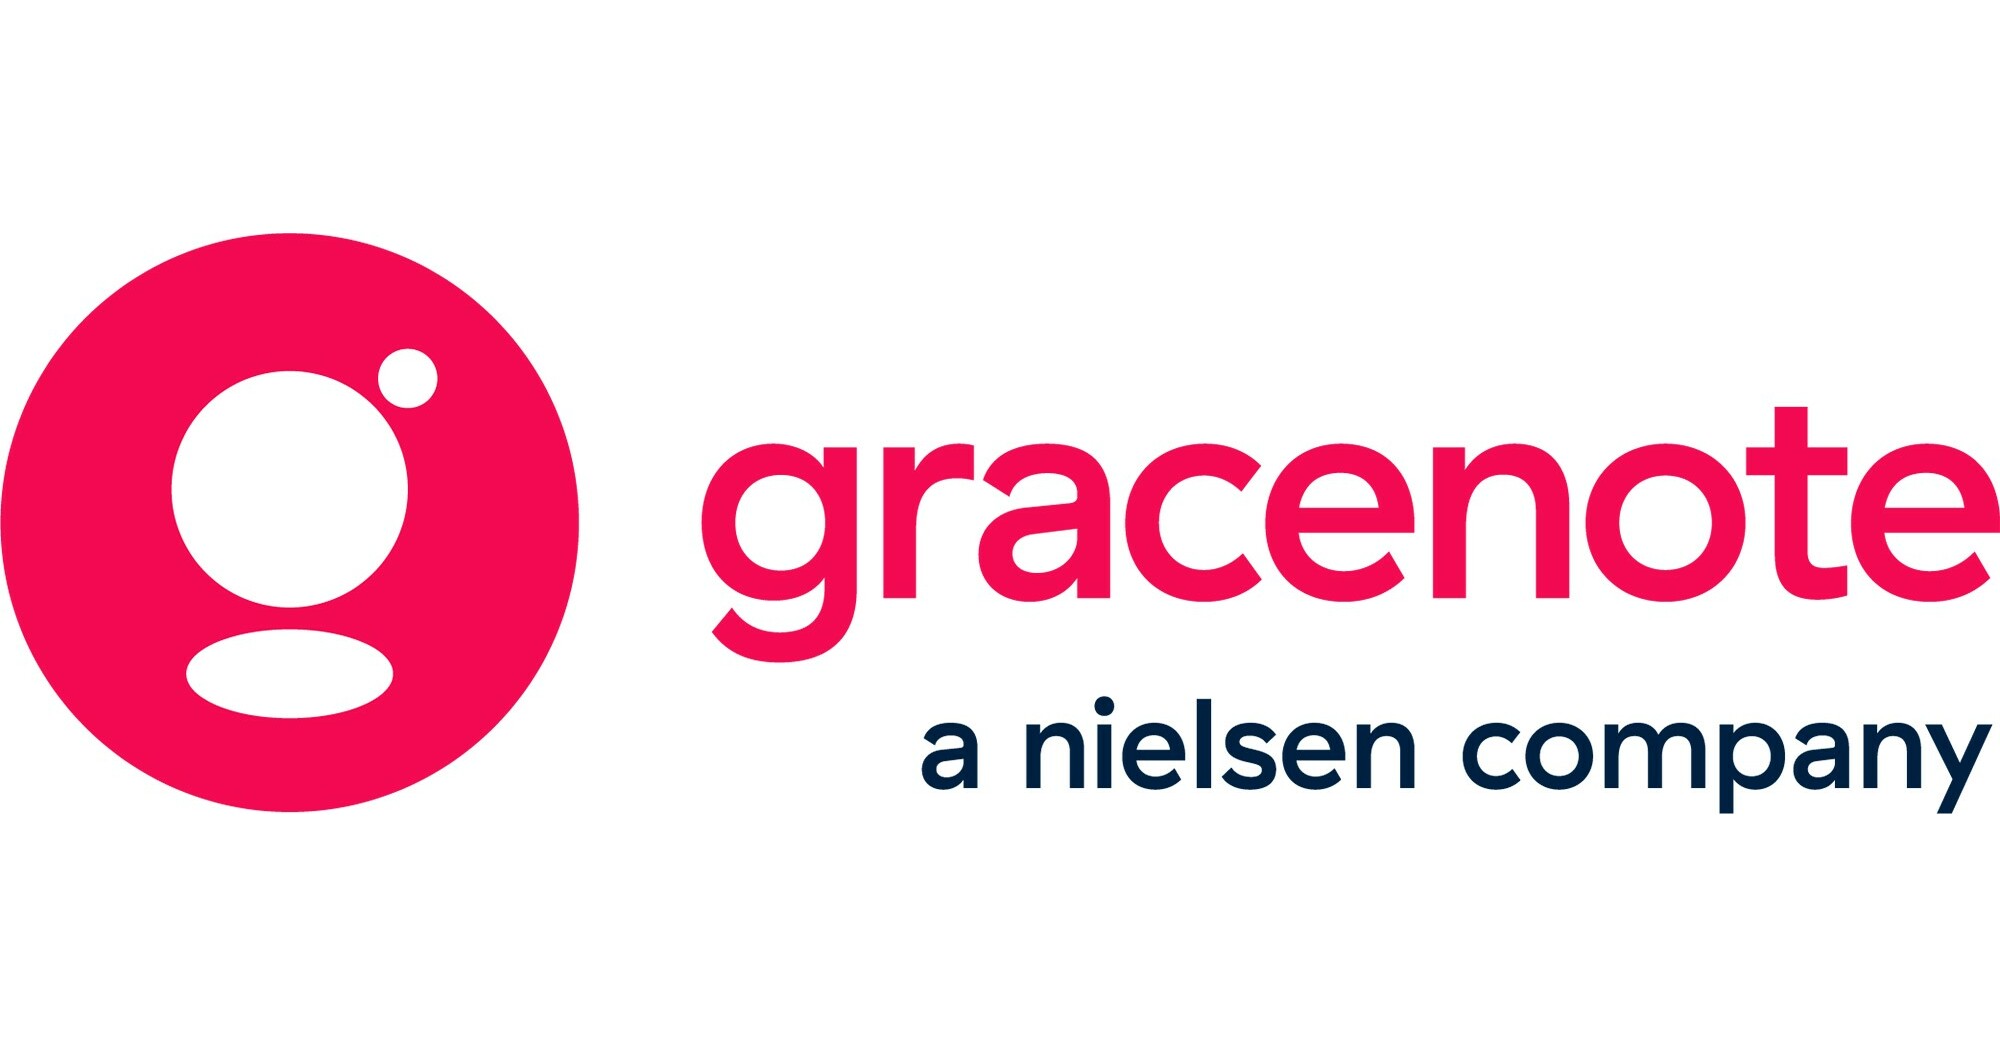 Nielsen's Gracenote Drives Next Evolution of Hollywood Project Management with Debut of New Studio Solutions Suite USA